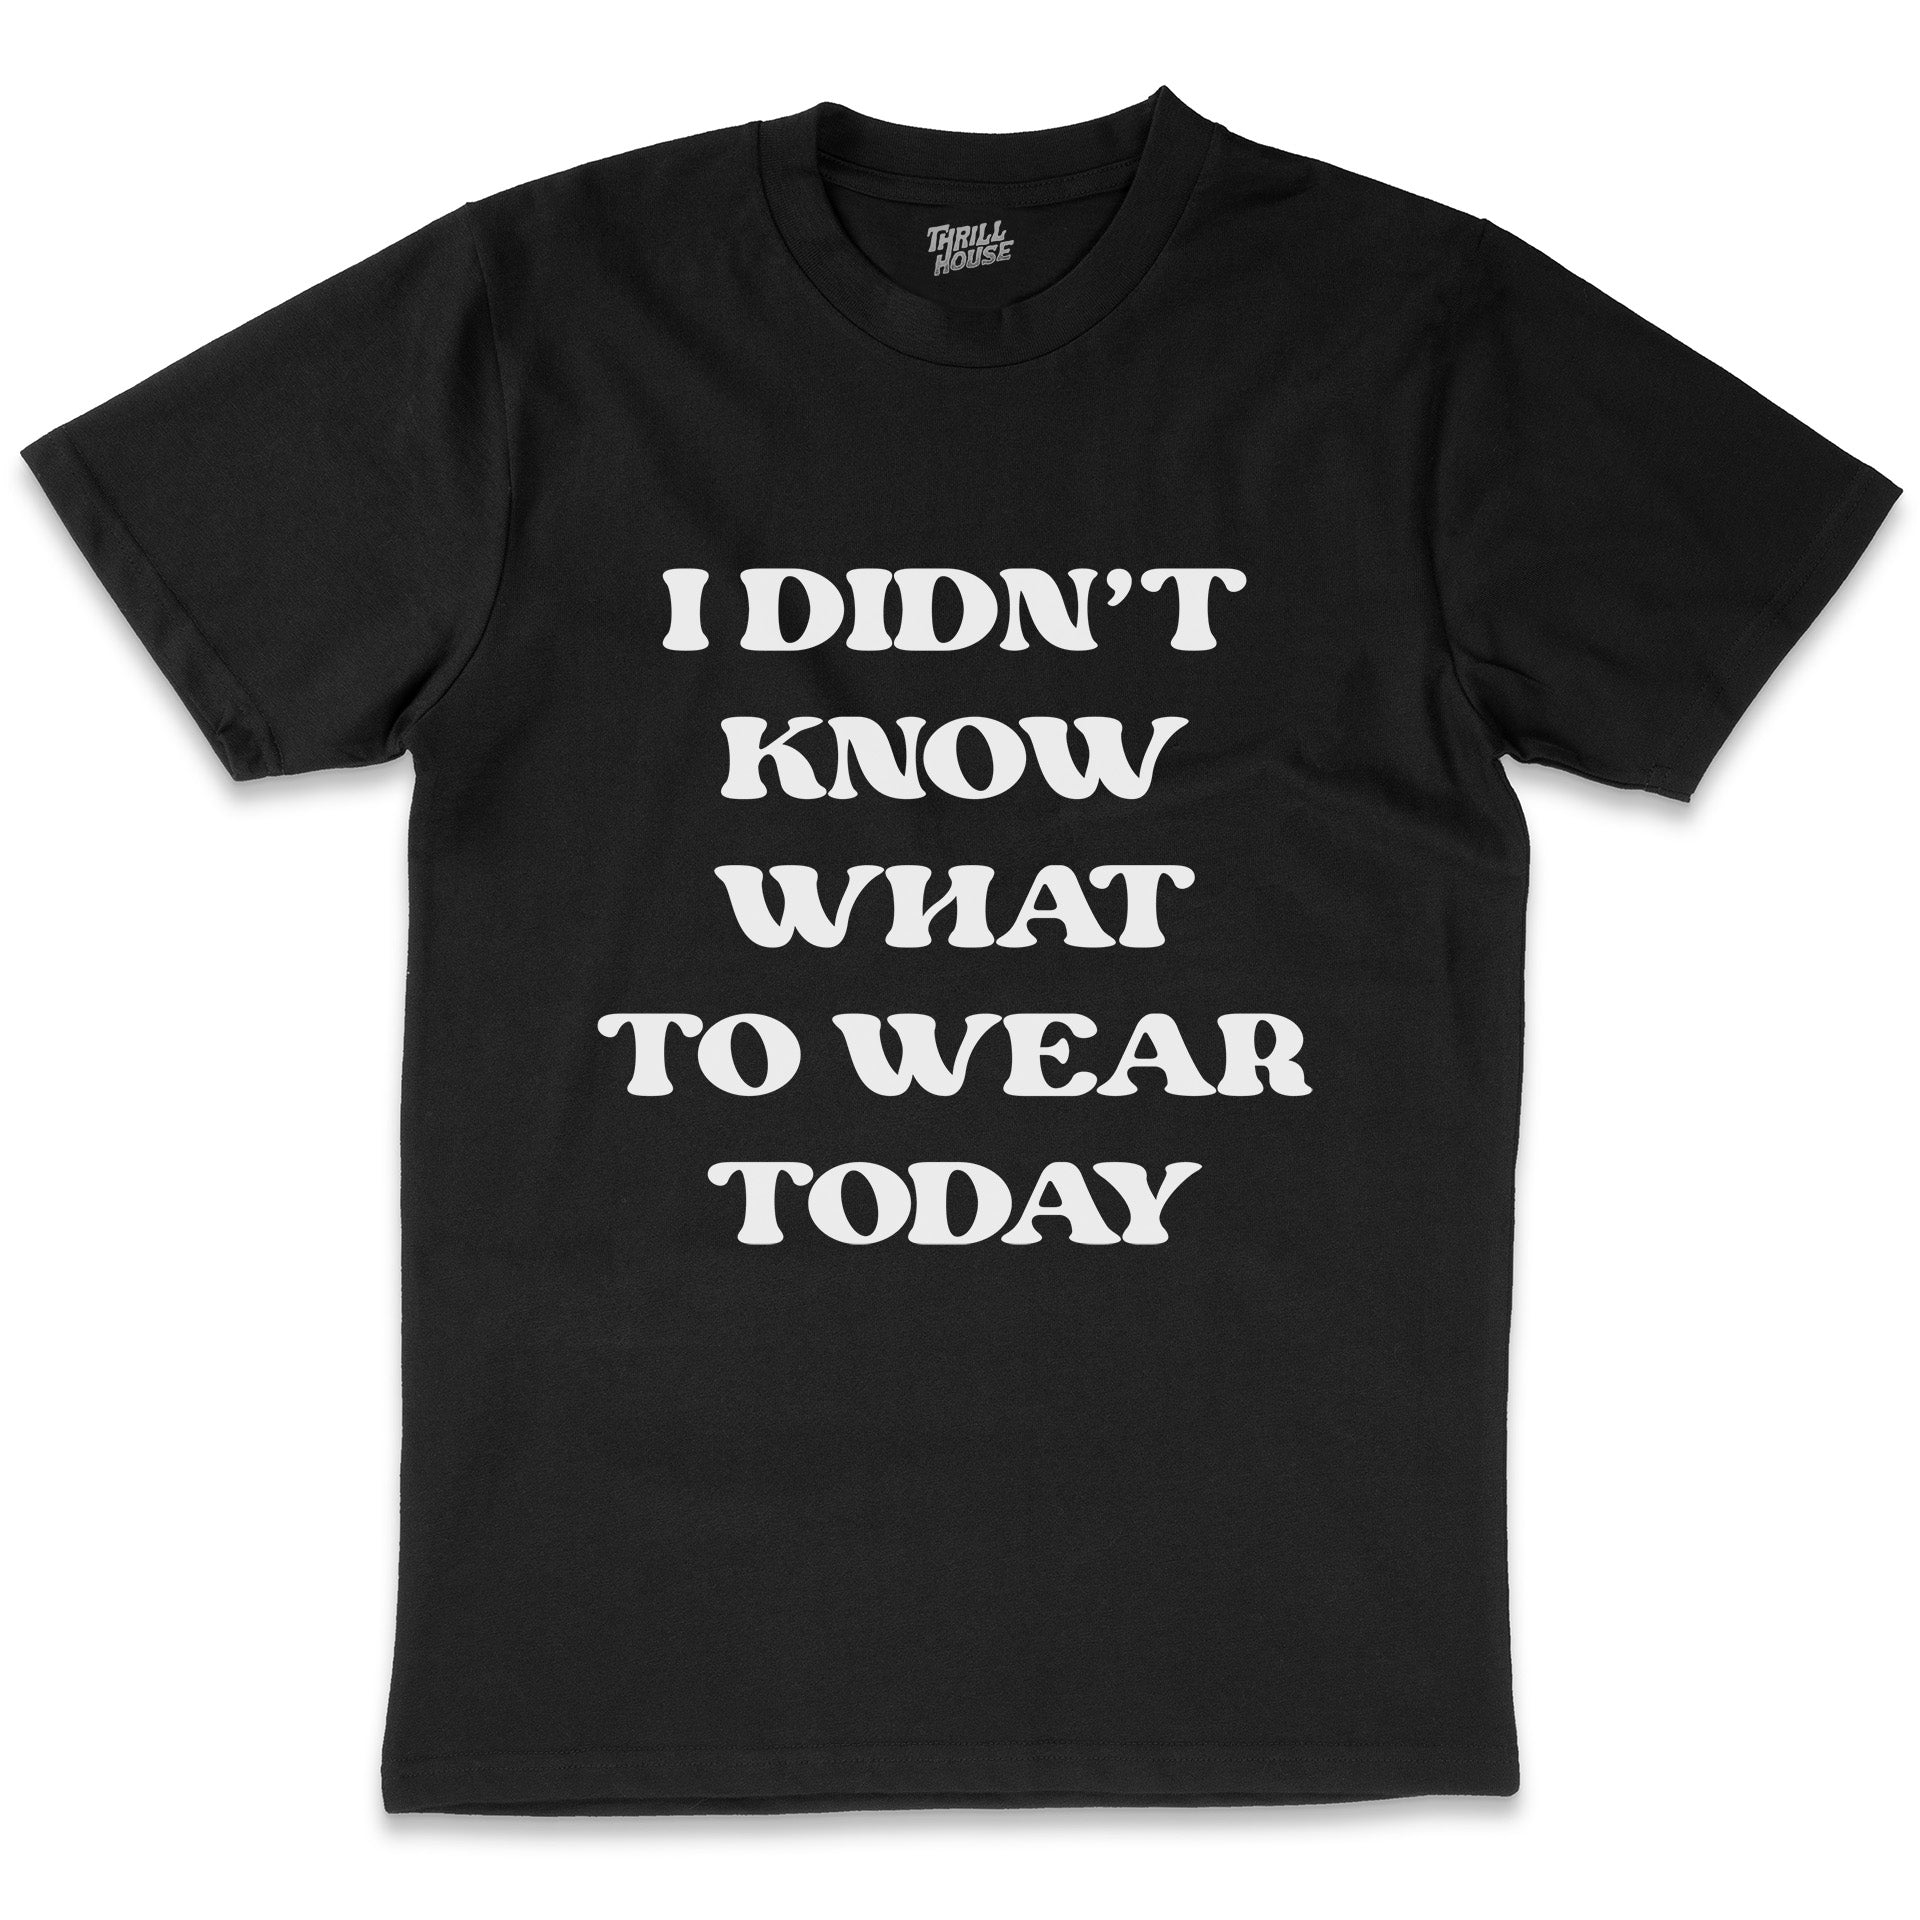 I Didn't Know What to Wear Today Funny Slogan Fashion Cotton T-Shirt